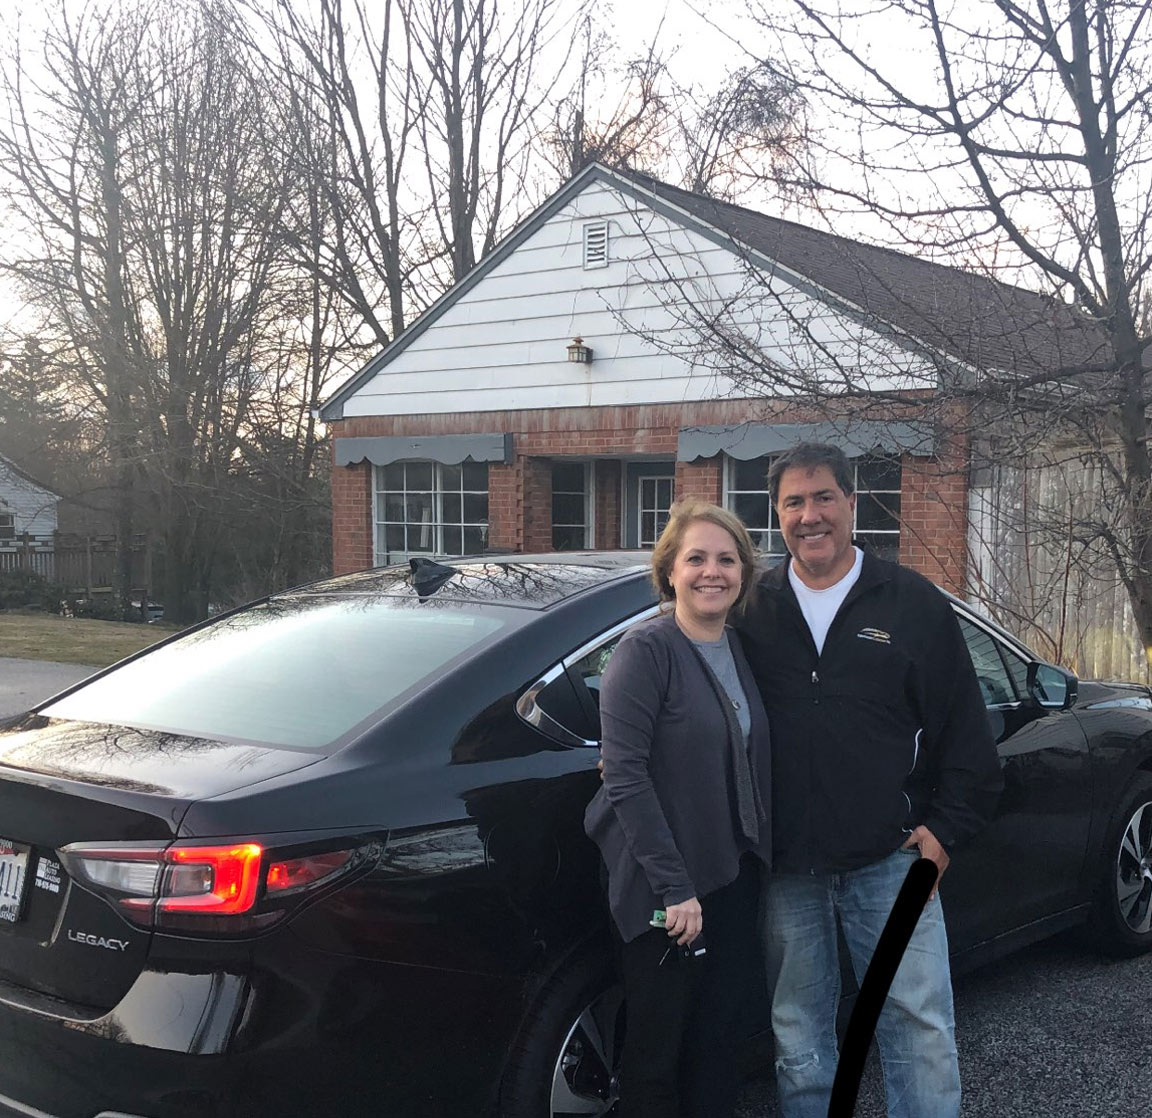 Michael and Andrea from Chagrin Falls next to her new car.